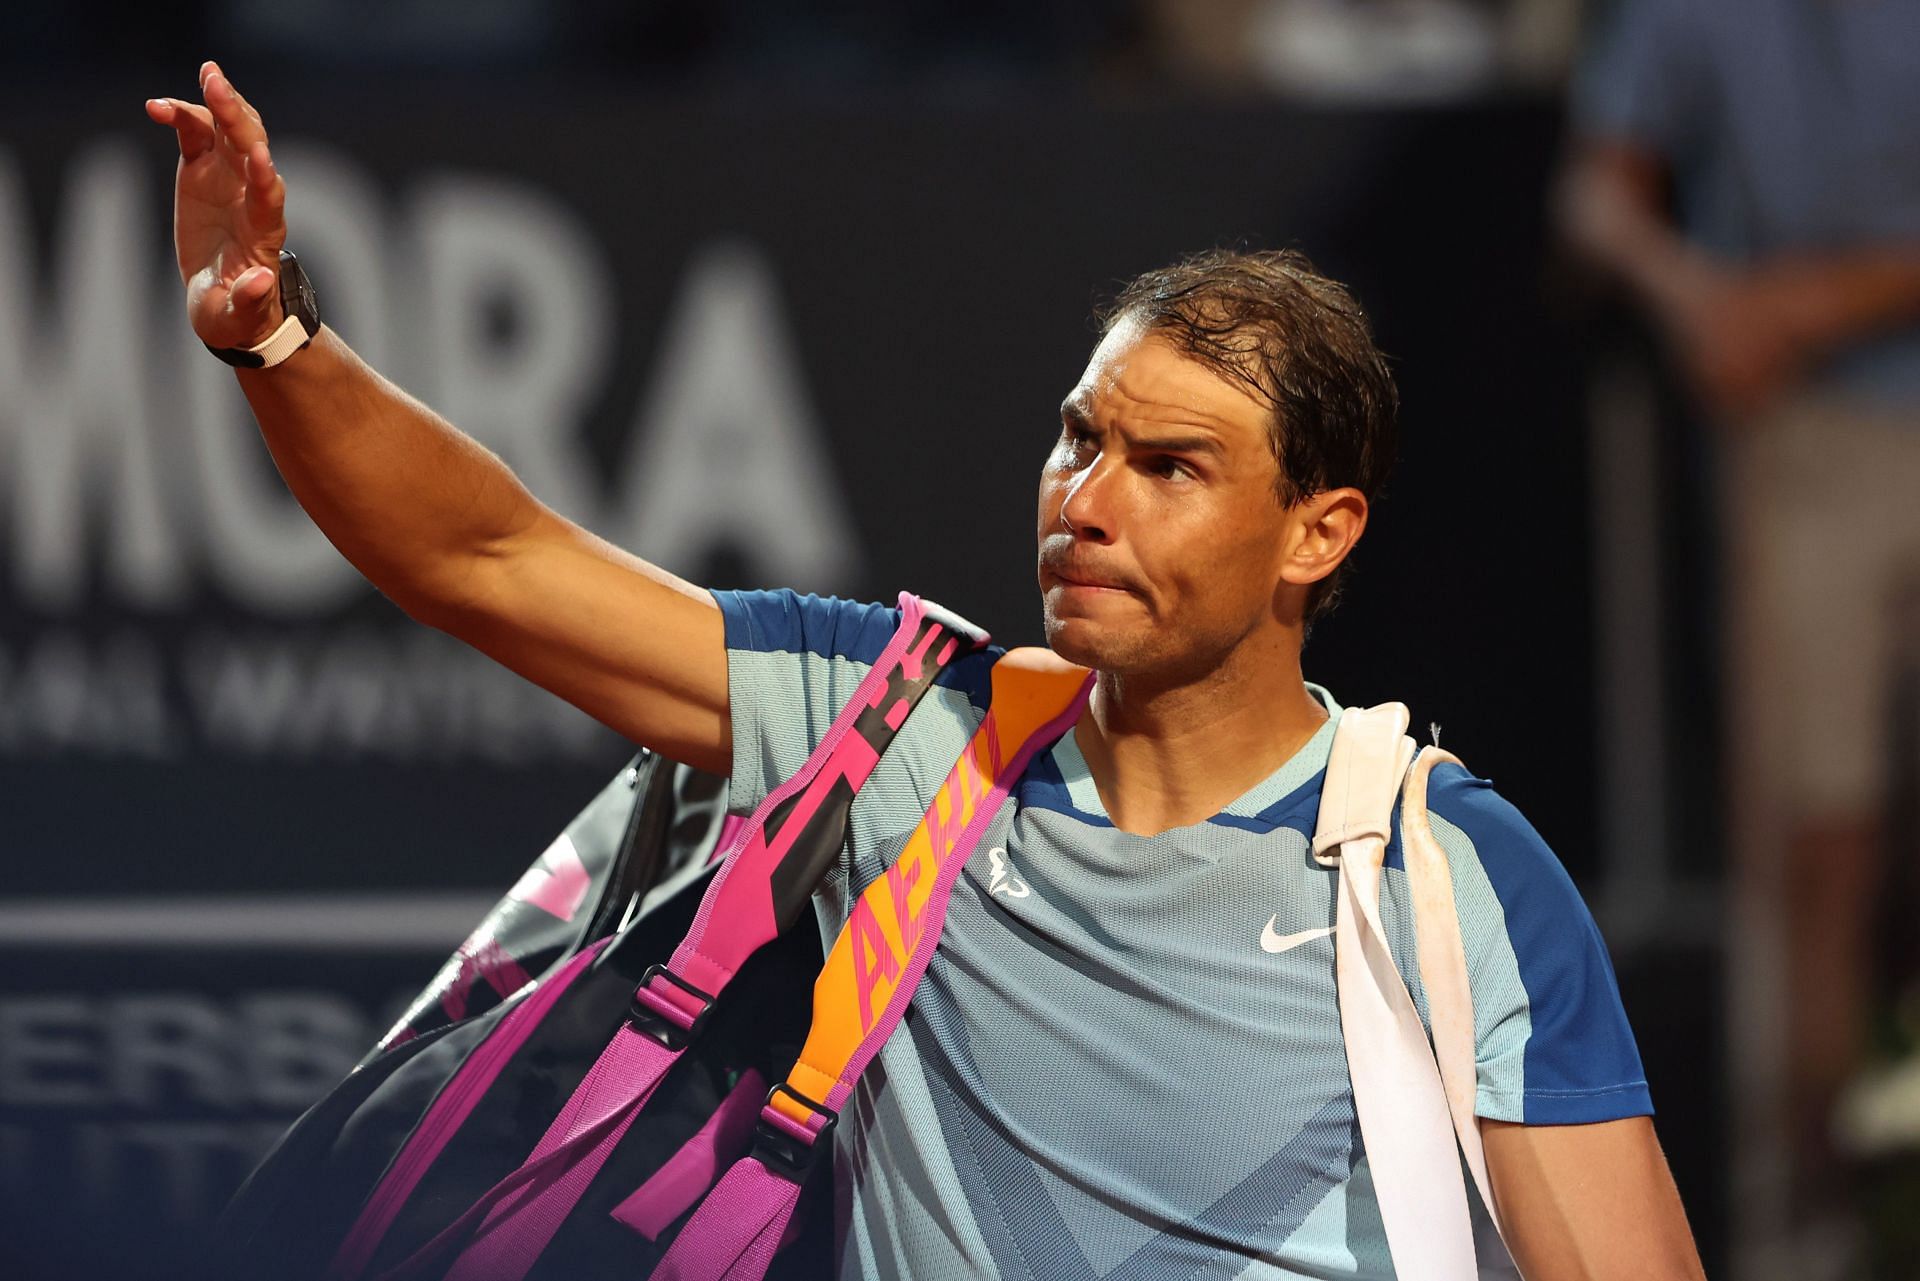 Rafael Nadal greets the crowd in Rome - photo by Alex Pantling/Getty Images